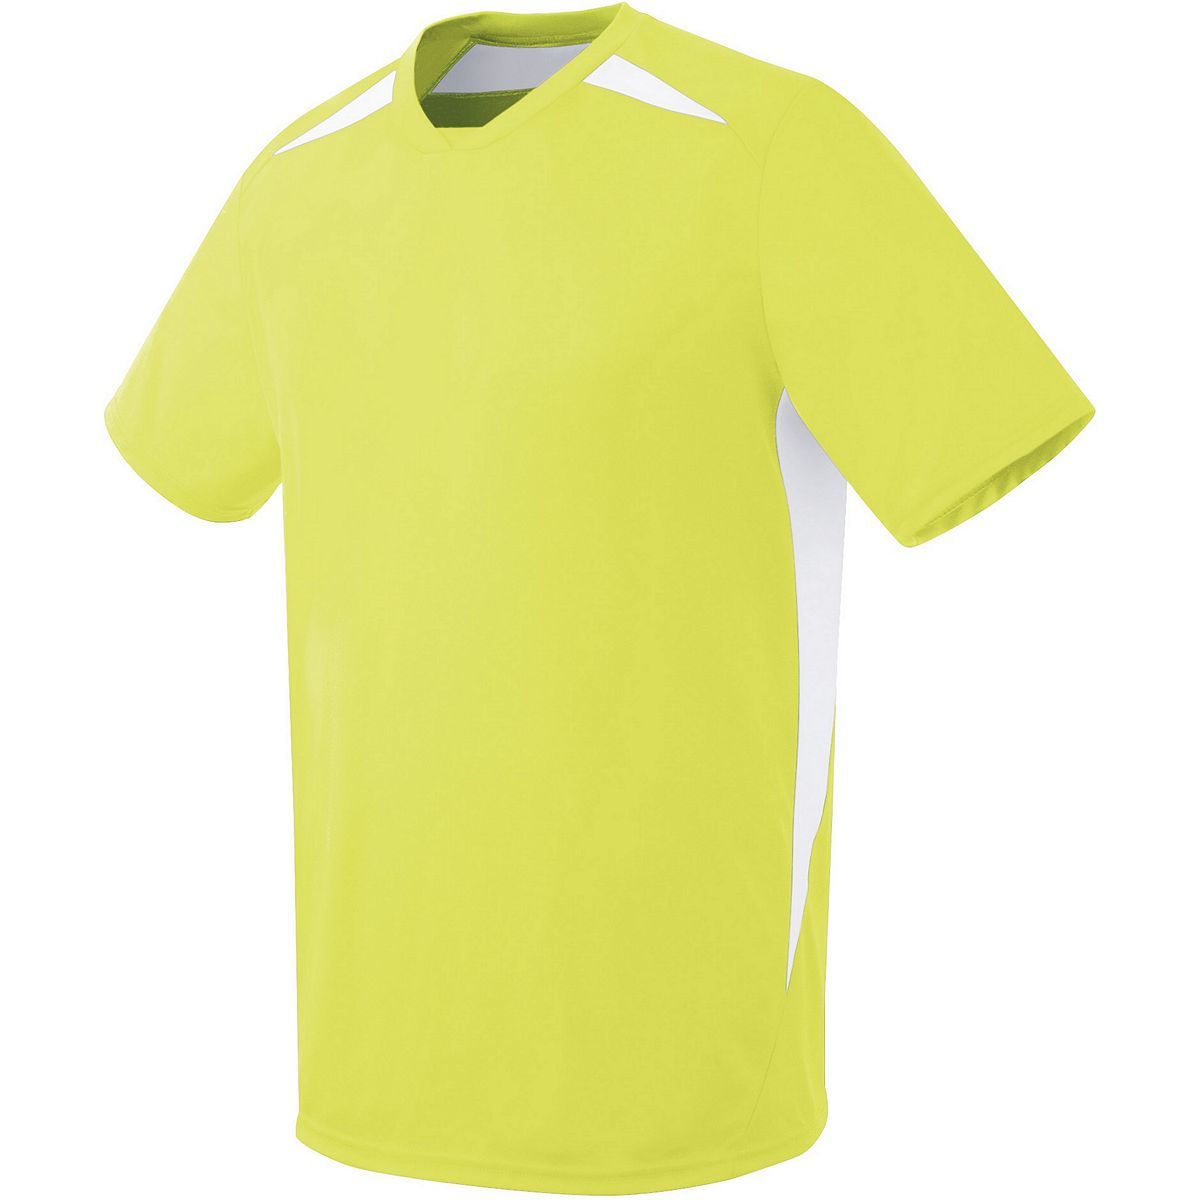 High 5 Youth Hawk Jersey in Lime/White  -Part of the Youth, Youth-Jersey, High5-Products, Soccer, Shirts, All-Sports-1 product lines at KanaleyCreations.com